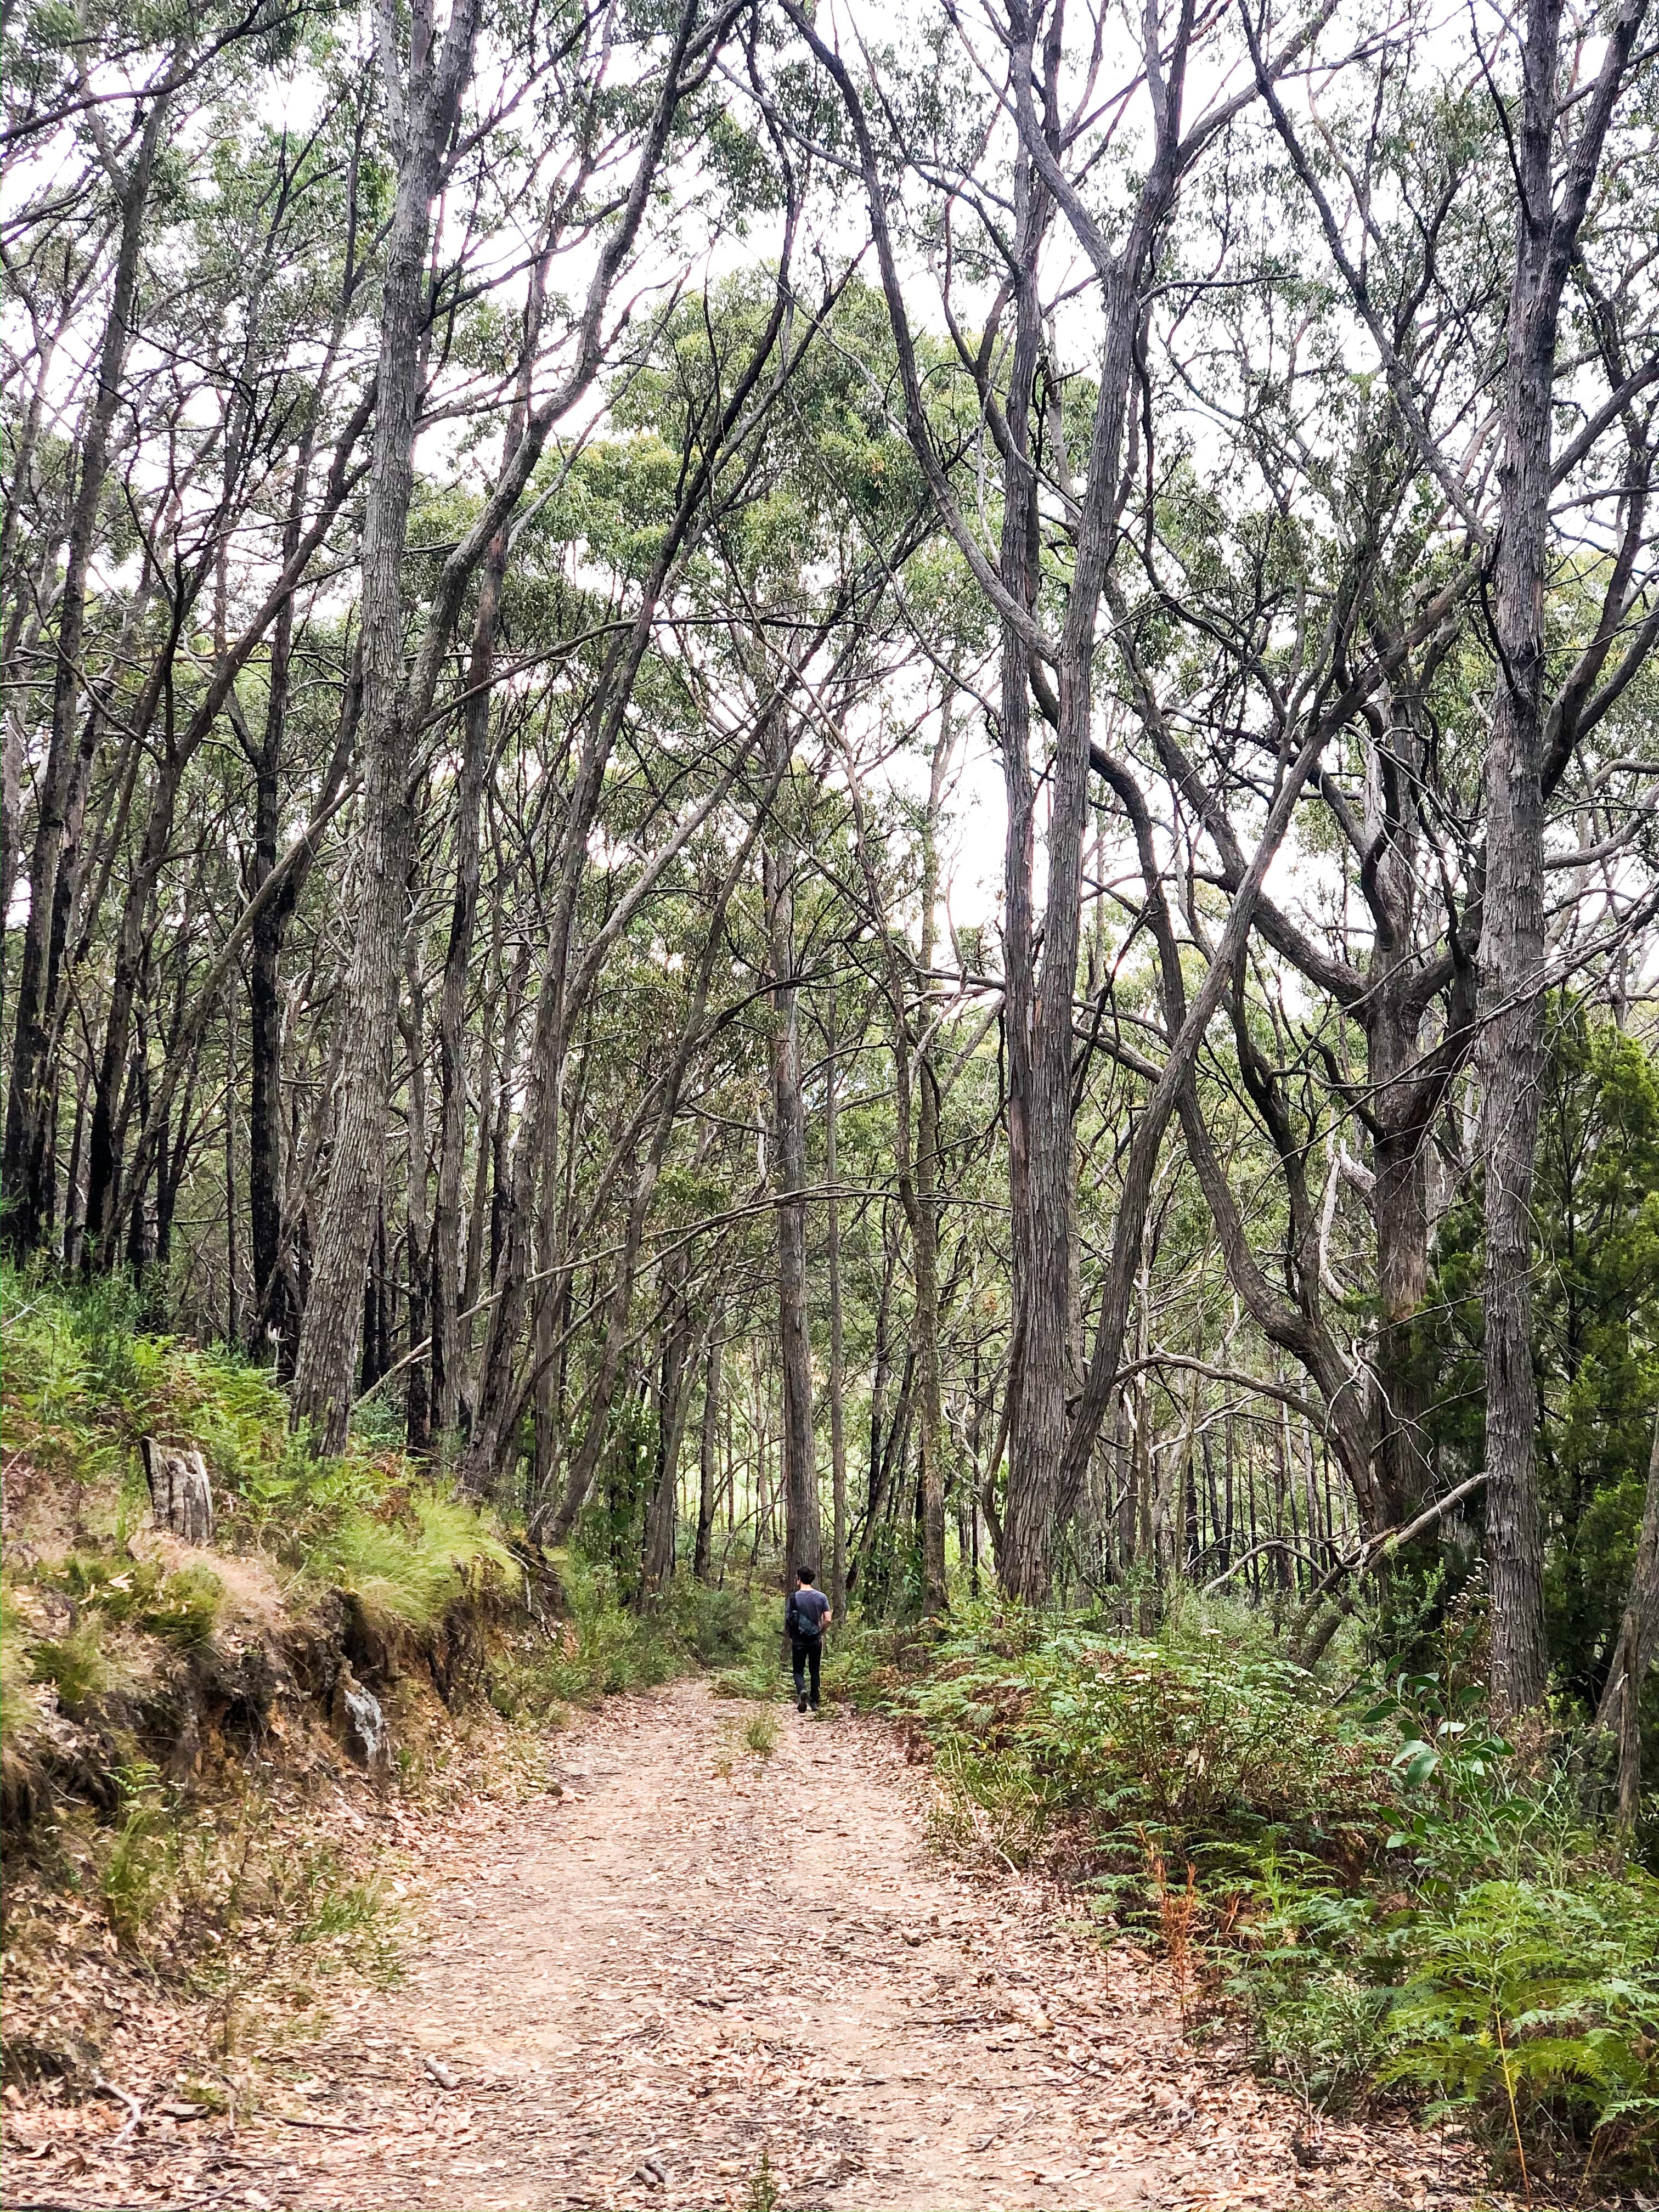 Views from isolation : Beck takes us on a visual journey of her weekend walks in the Adelaide Hills - Impulse Boutique